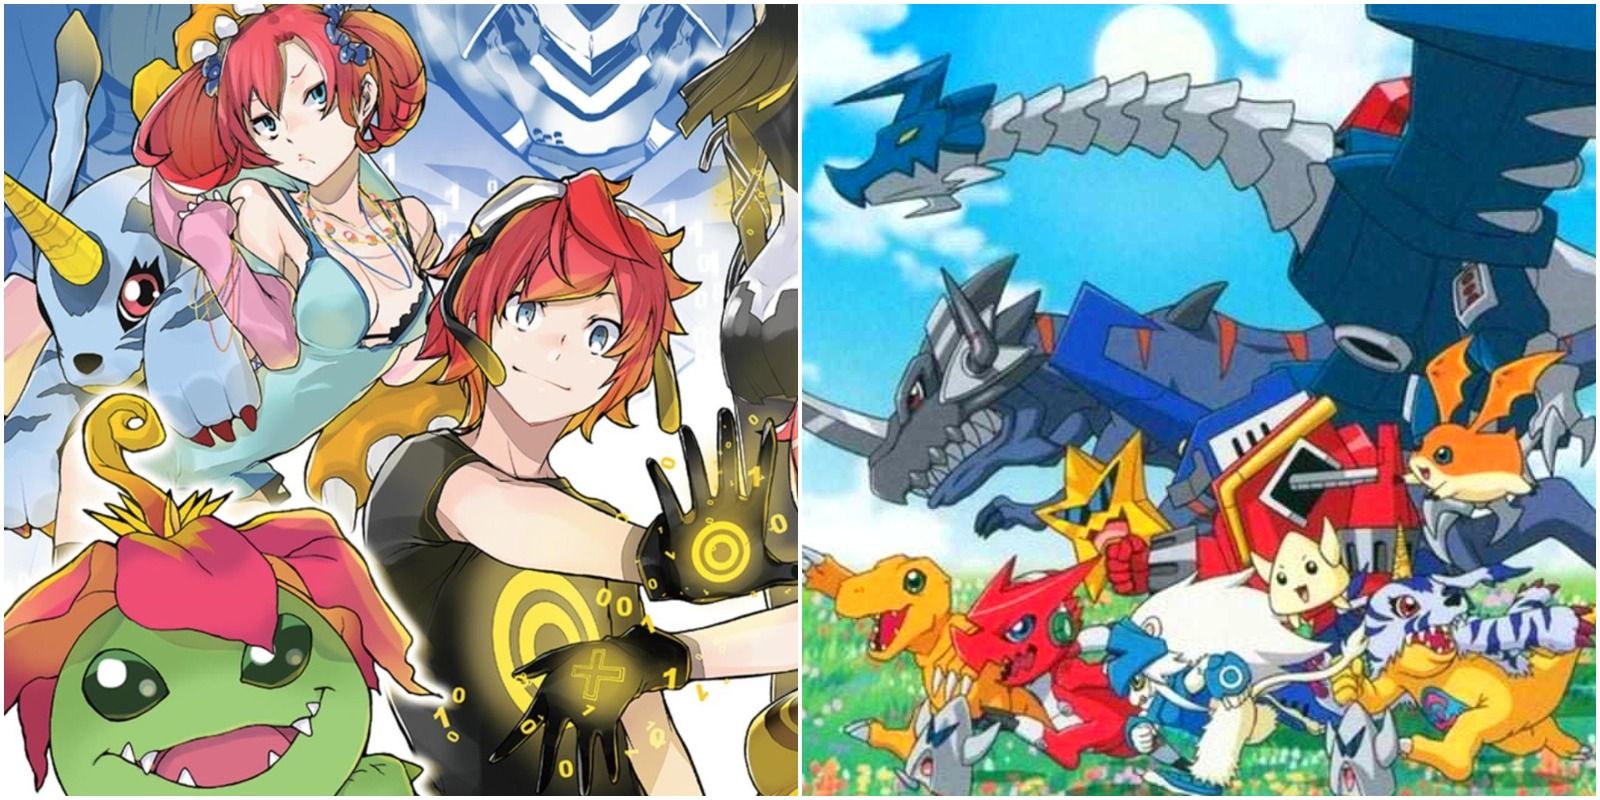 art from digimon story cyber sleuth and another japan only digimon game.